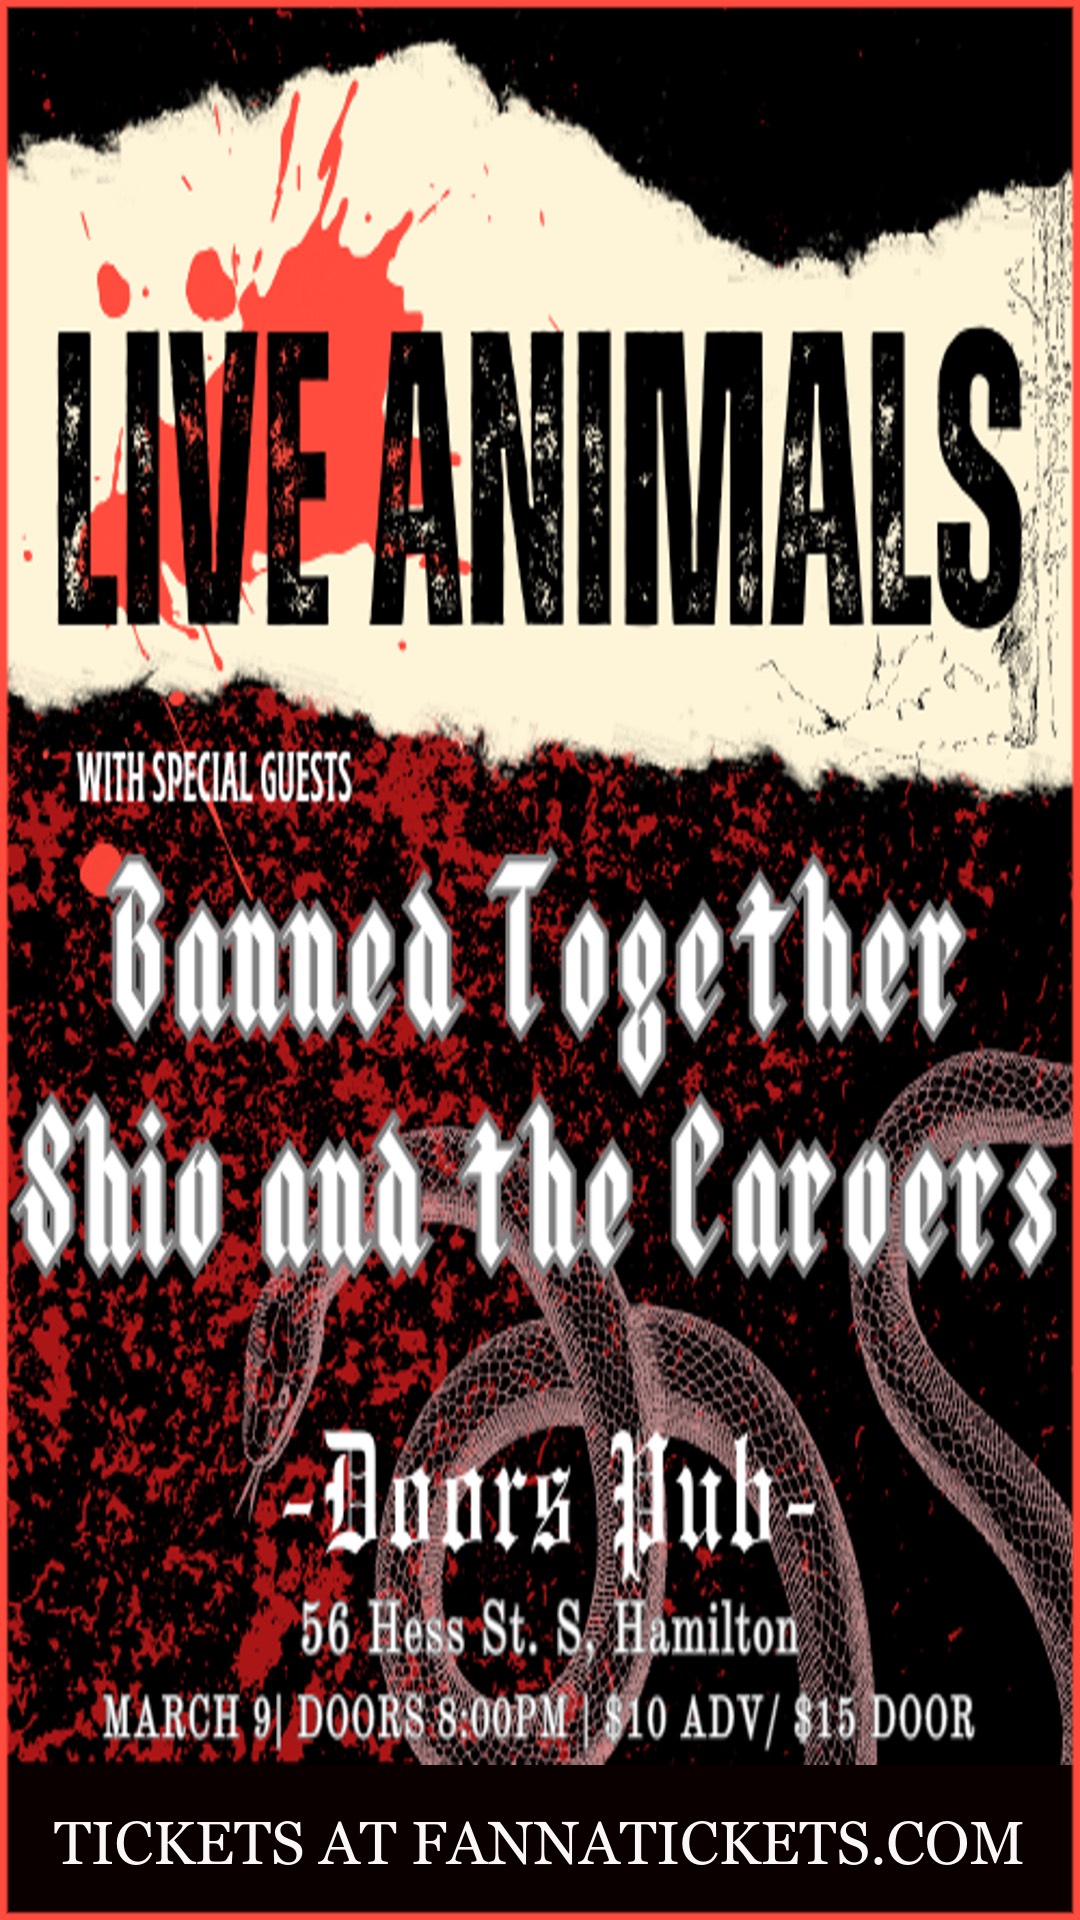 Live Animals, Banned Together, Shiv and the Carvers at Doors Pub Hamilton